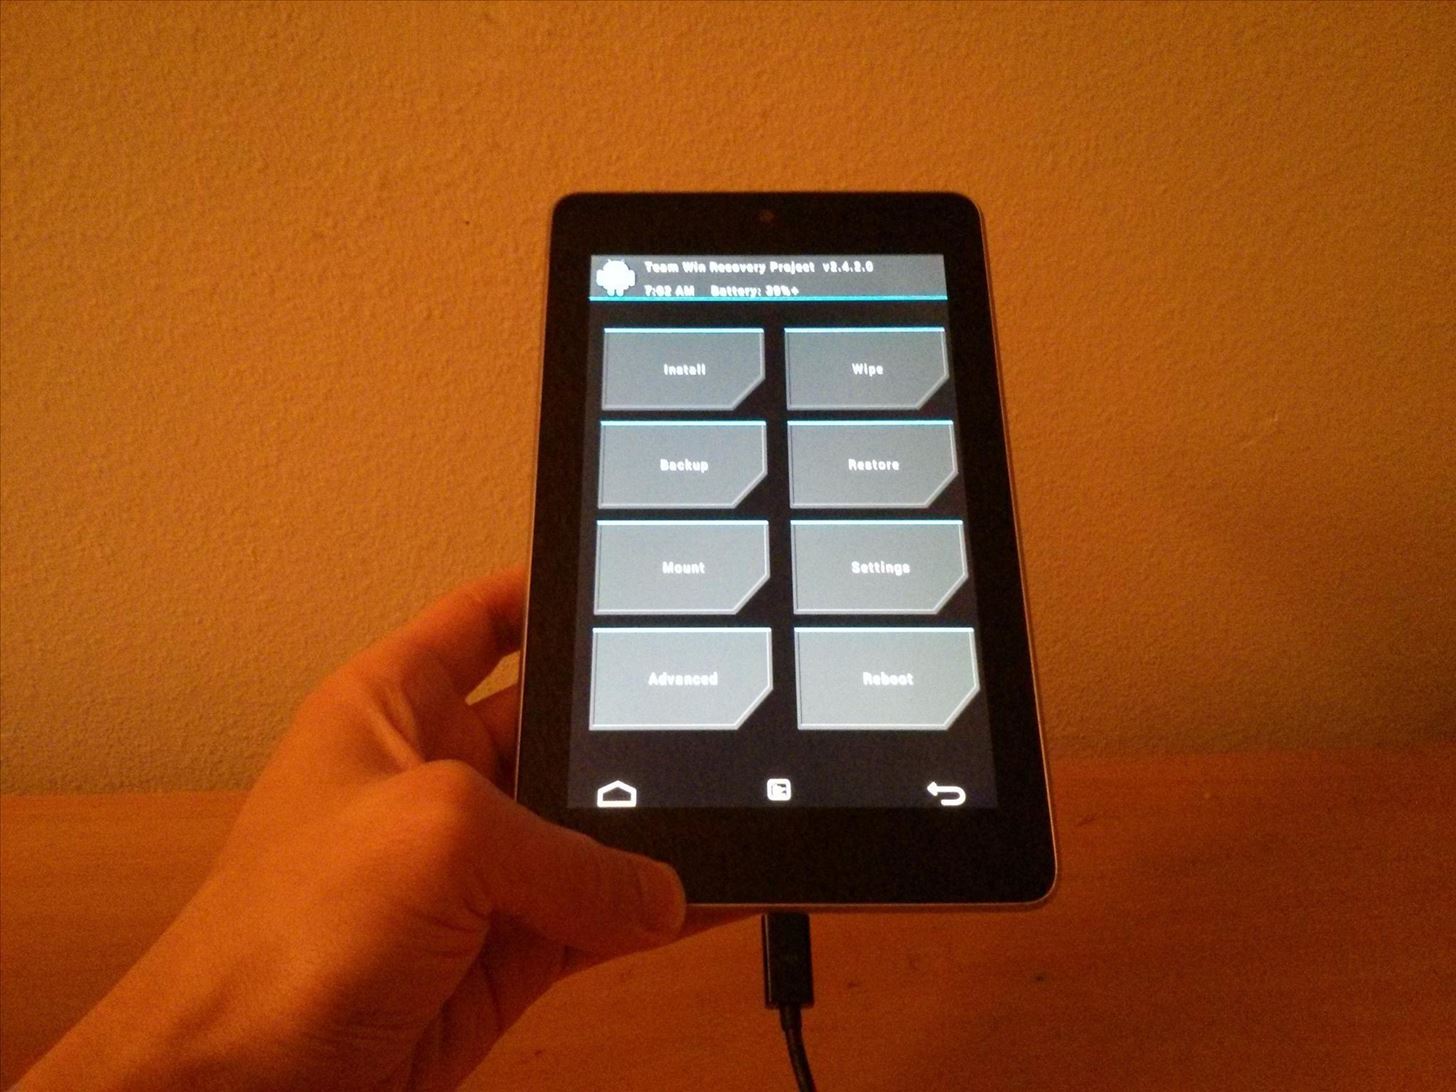 The Definitive Nexus 7 Guide to Bootloader Unlocking, Rooting, & Installing Custom Recoveries